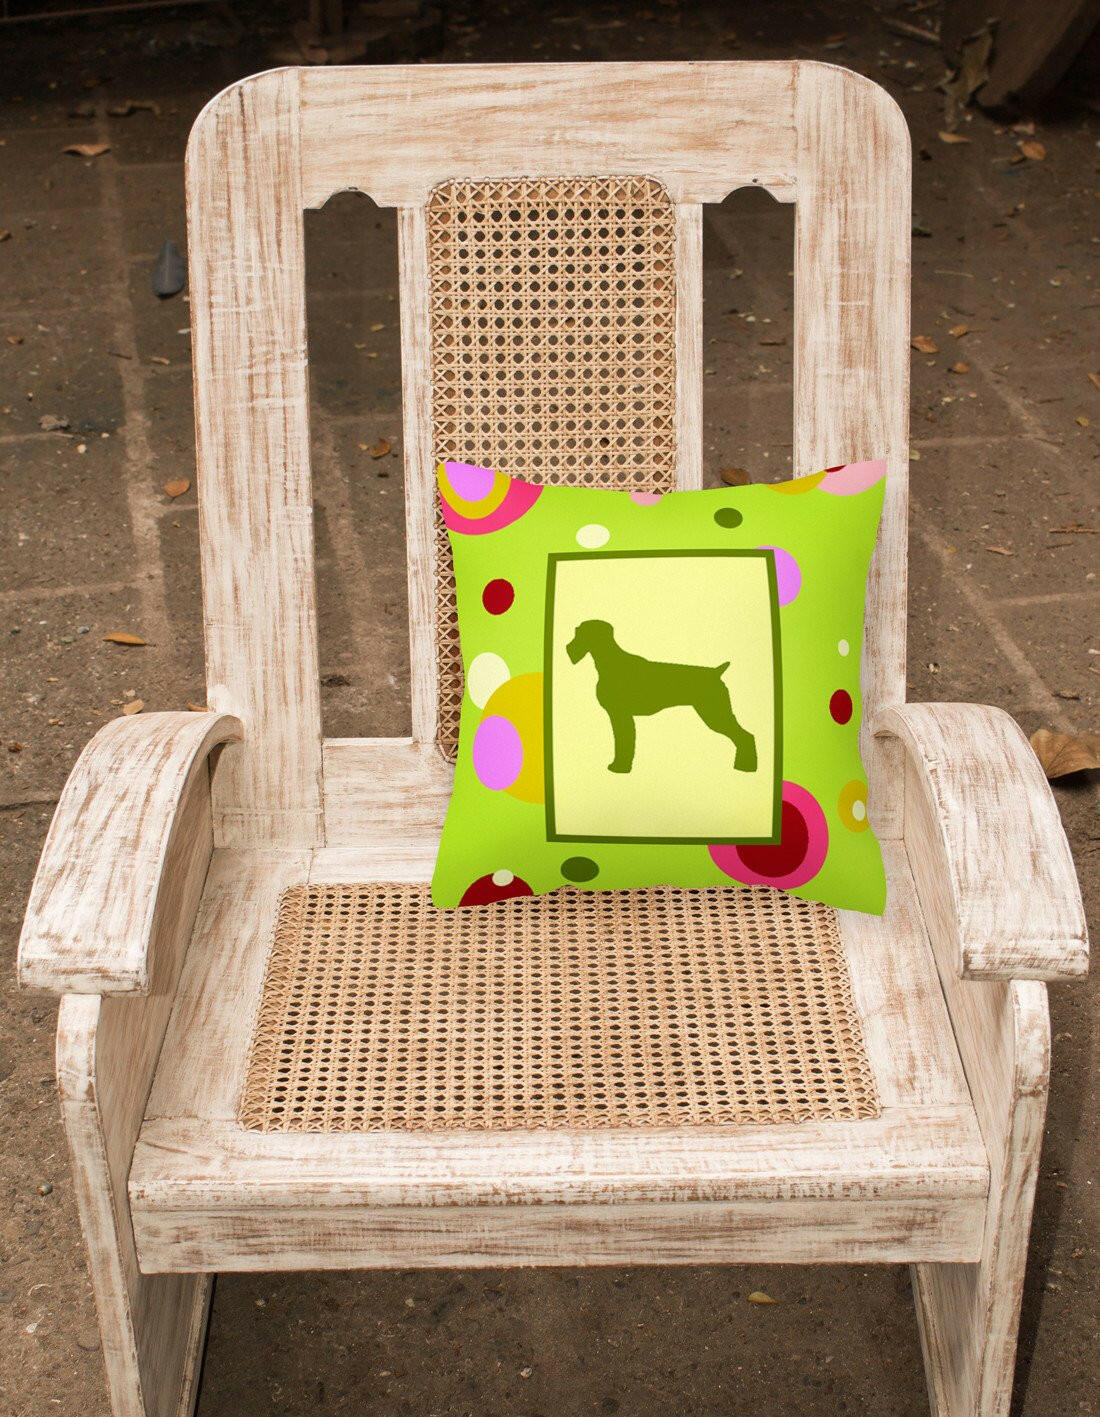 Lime Green Dots German Wirehaired Pointer Fabric Decorative Pillow CK1036PW1414 by Caroline's Treasures